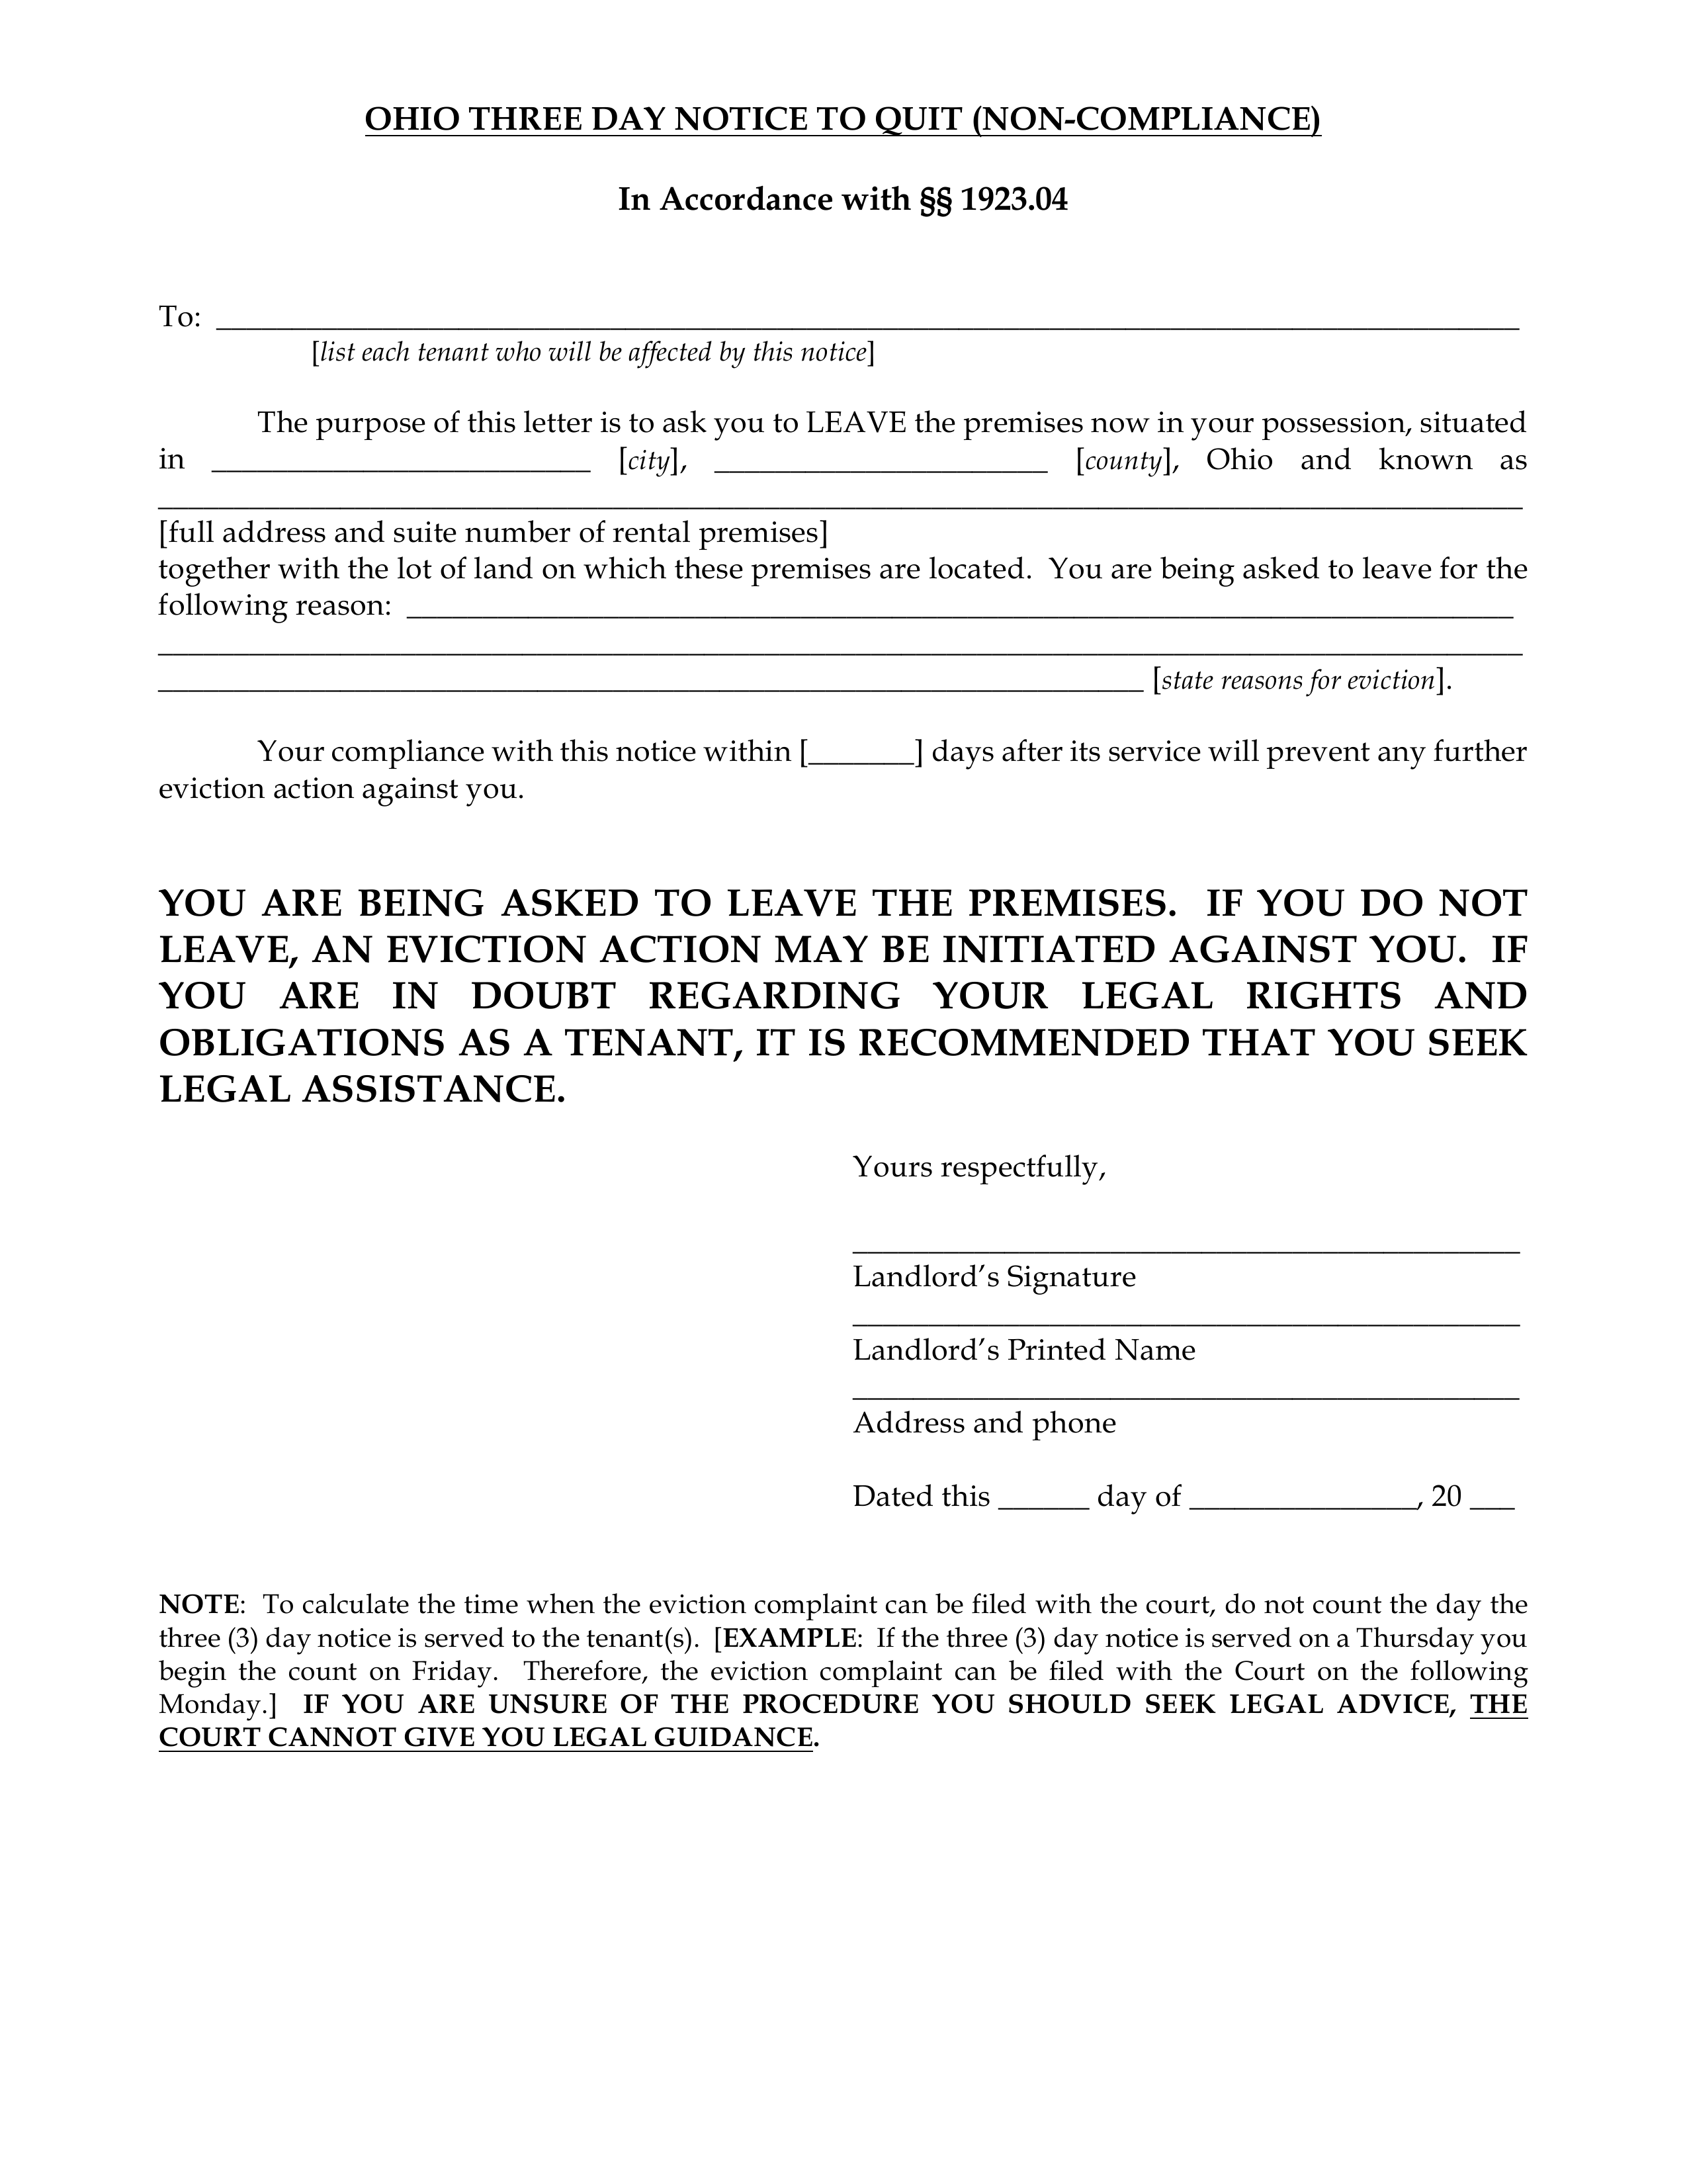 ohio 3 day notice to quit form non compliance eforms free